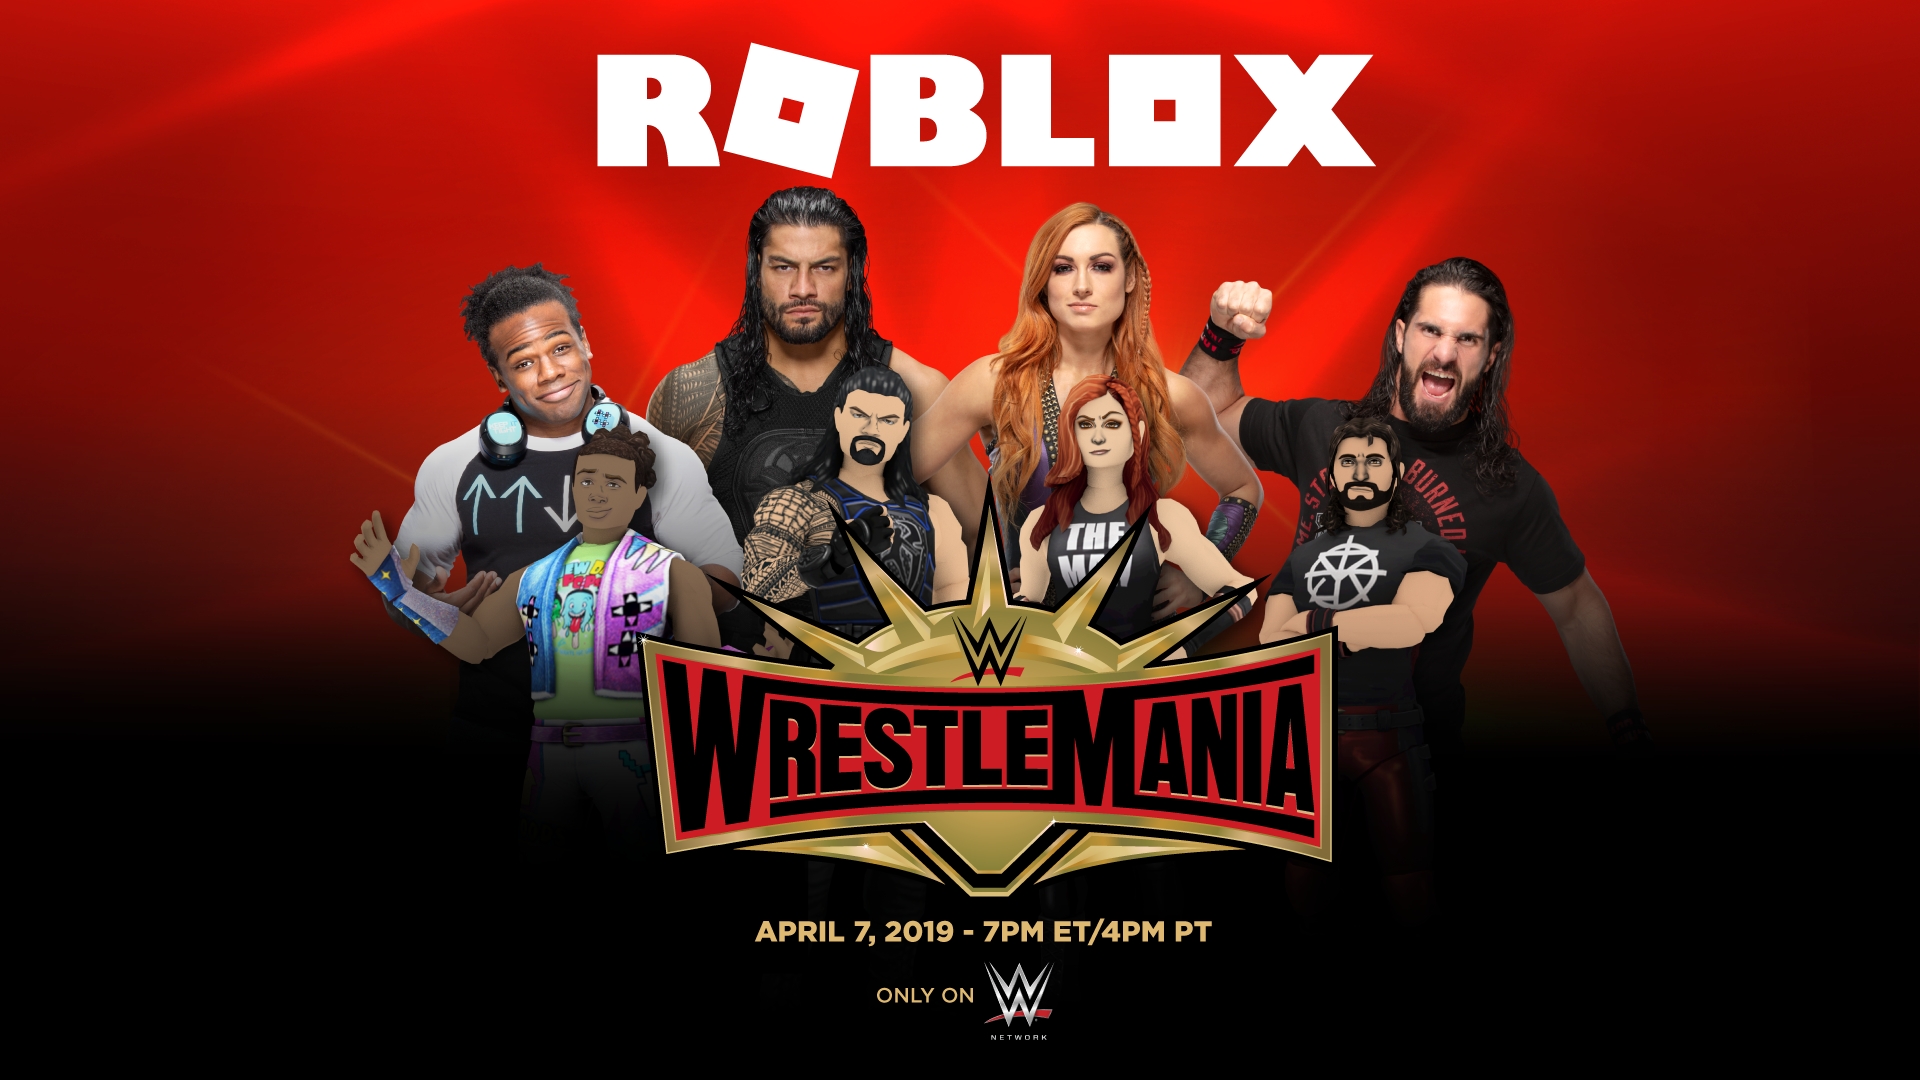 Roblox And Wwe Partner To Celebrate Wrestlemania Business Wire - roblox avatar size